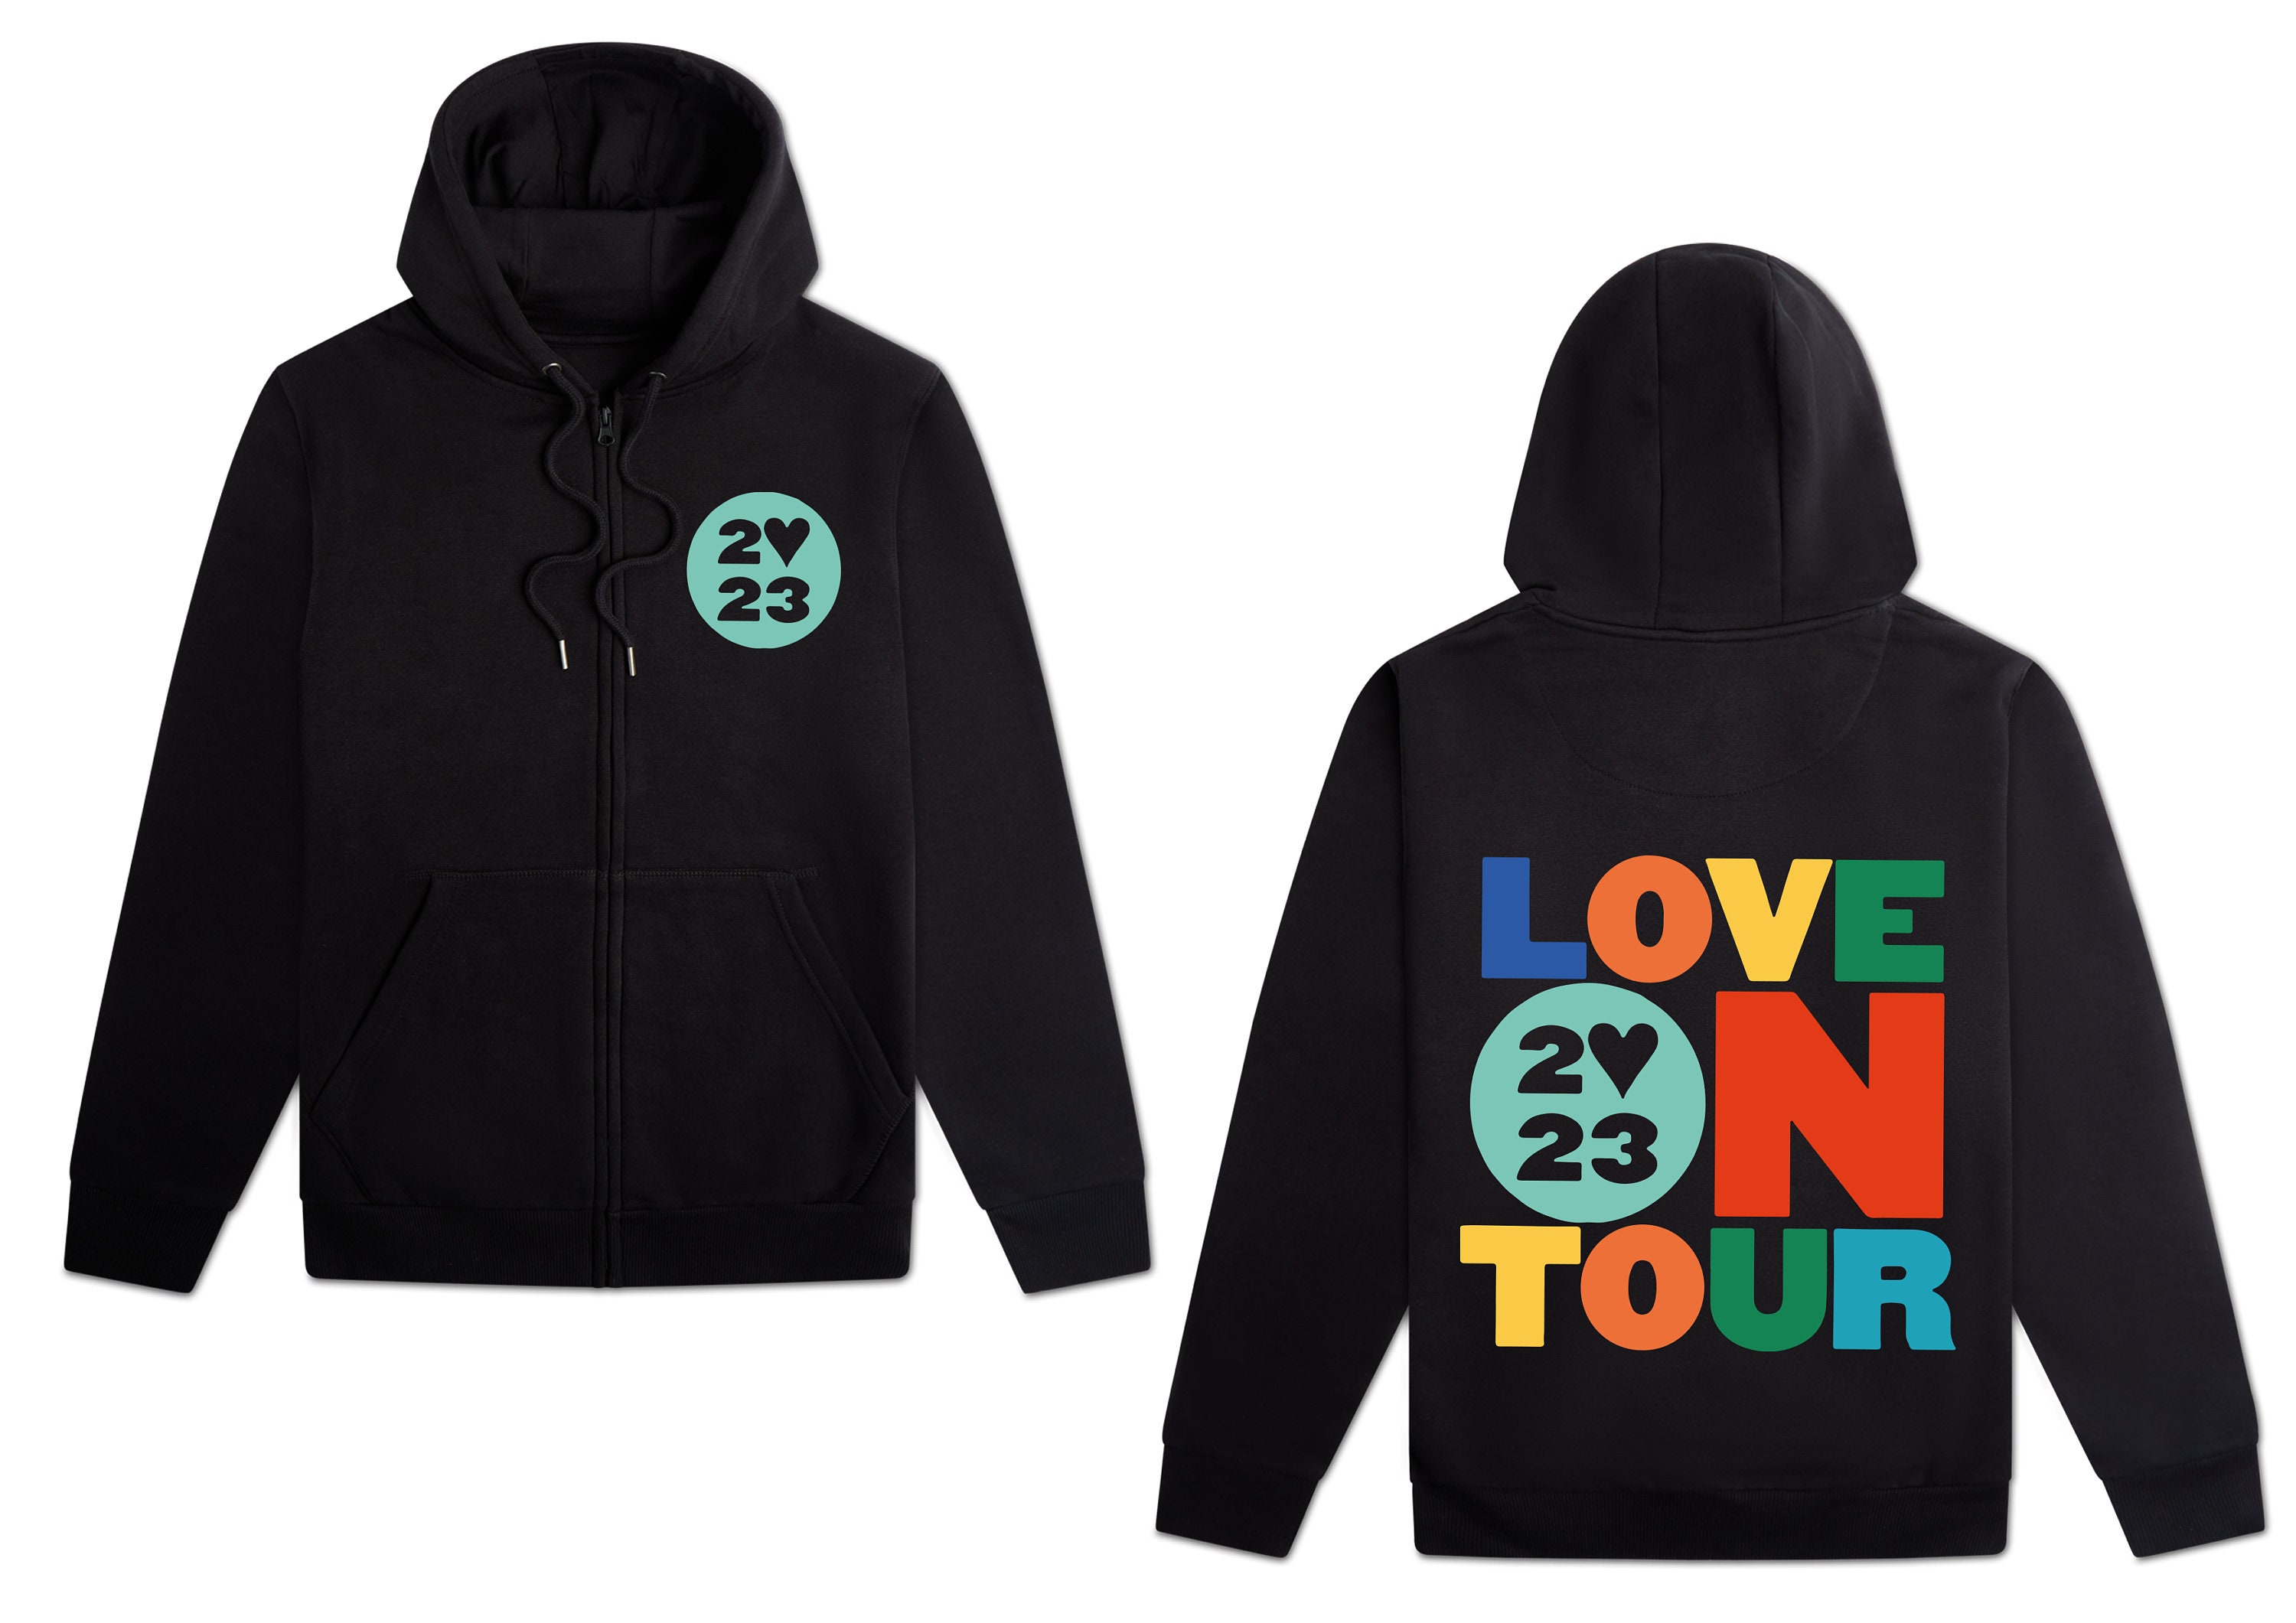 Love On Tour Zip Hoodie Harry Styles 2023 Concert Gig Shopping Merch Fan Inspired Clothing Birthday Gift Christmas Present